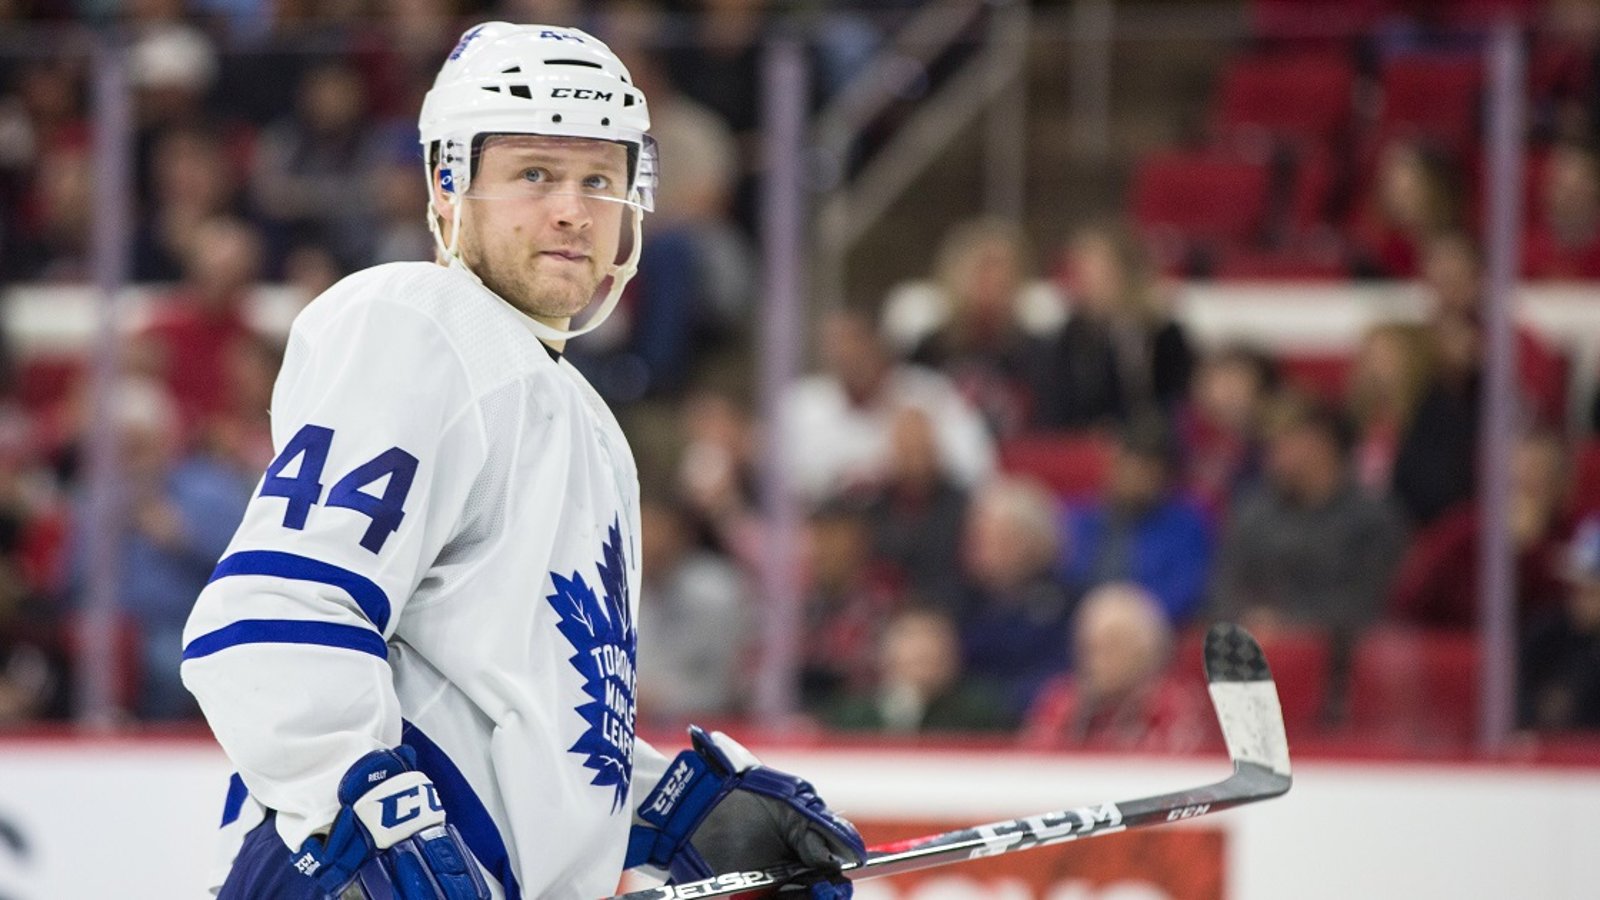 Surprising updates on both Morgan Rielly and Jake Muzzin from the Leafs.